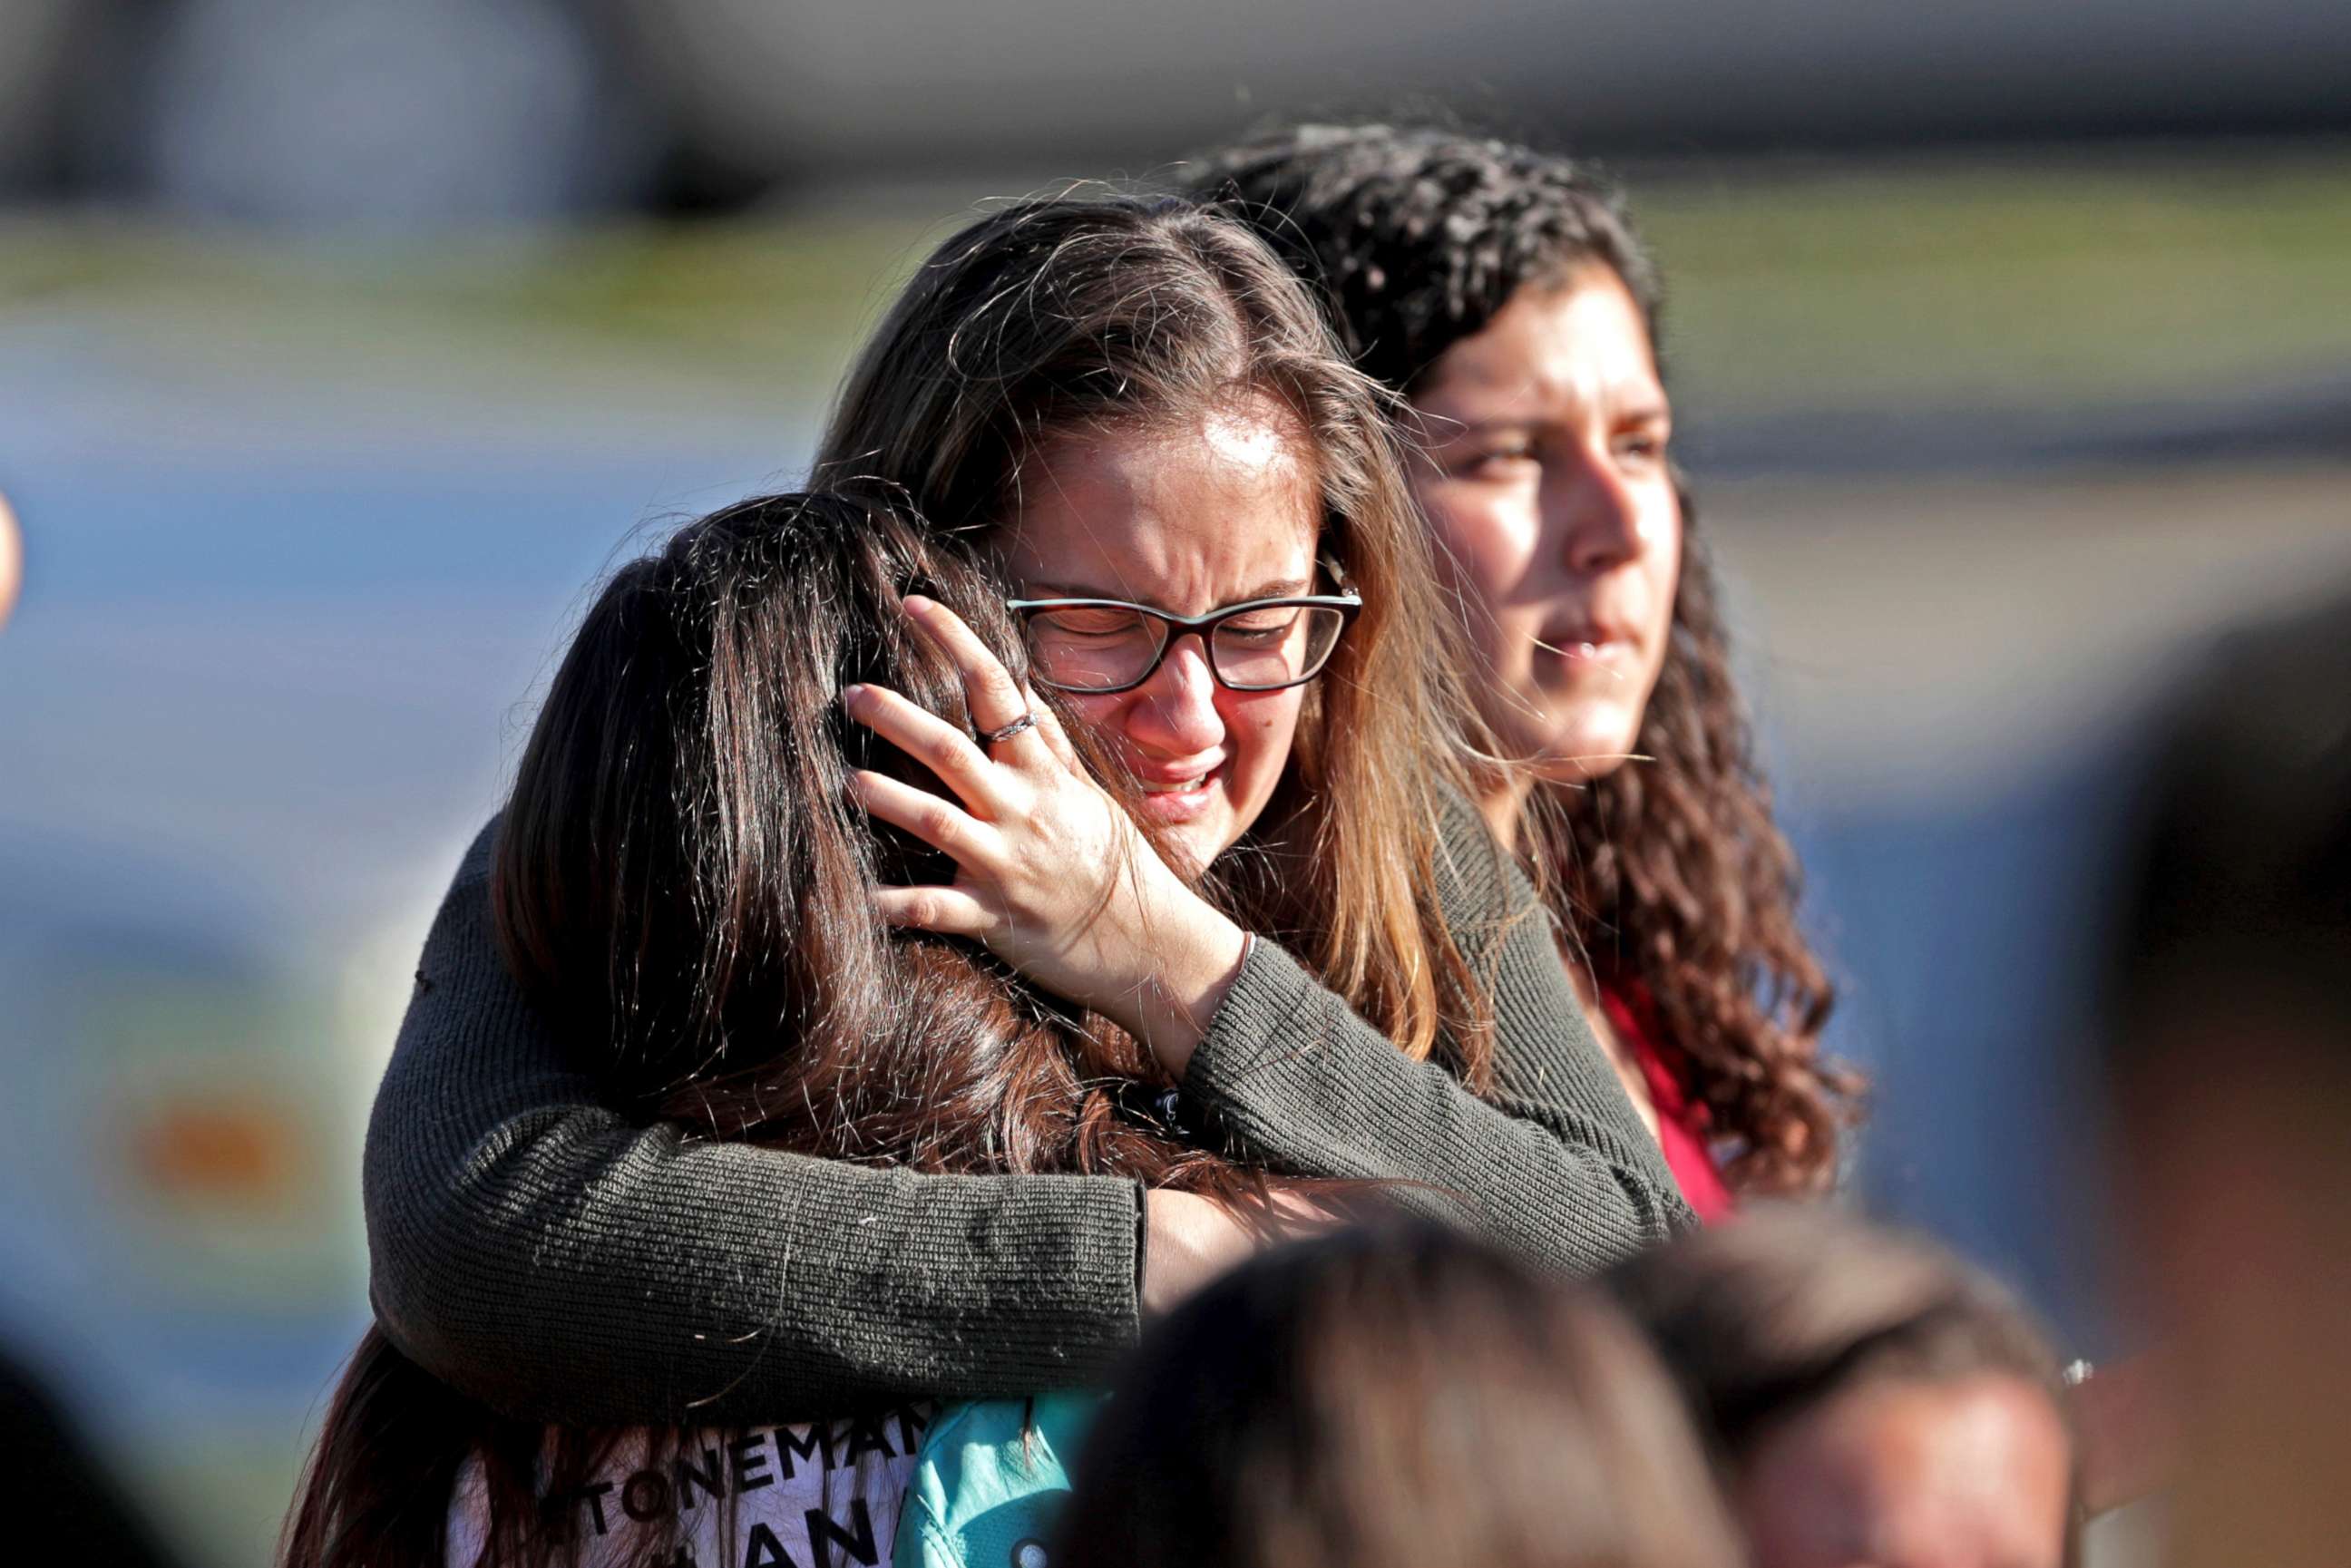 PHOTO: Students released from a lockdown embrace following a shooting at Marjory Stoneman Douglas High School in Parkland, Fla., Feb. 14, 2018.